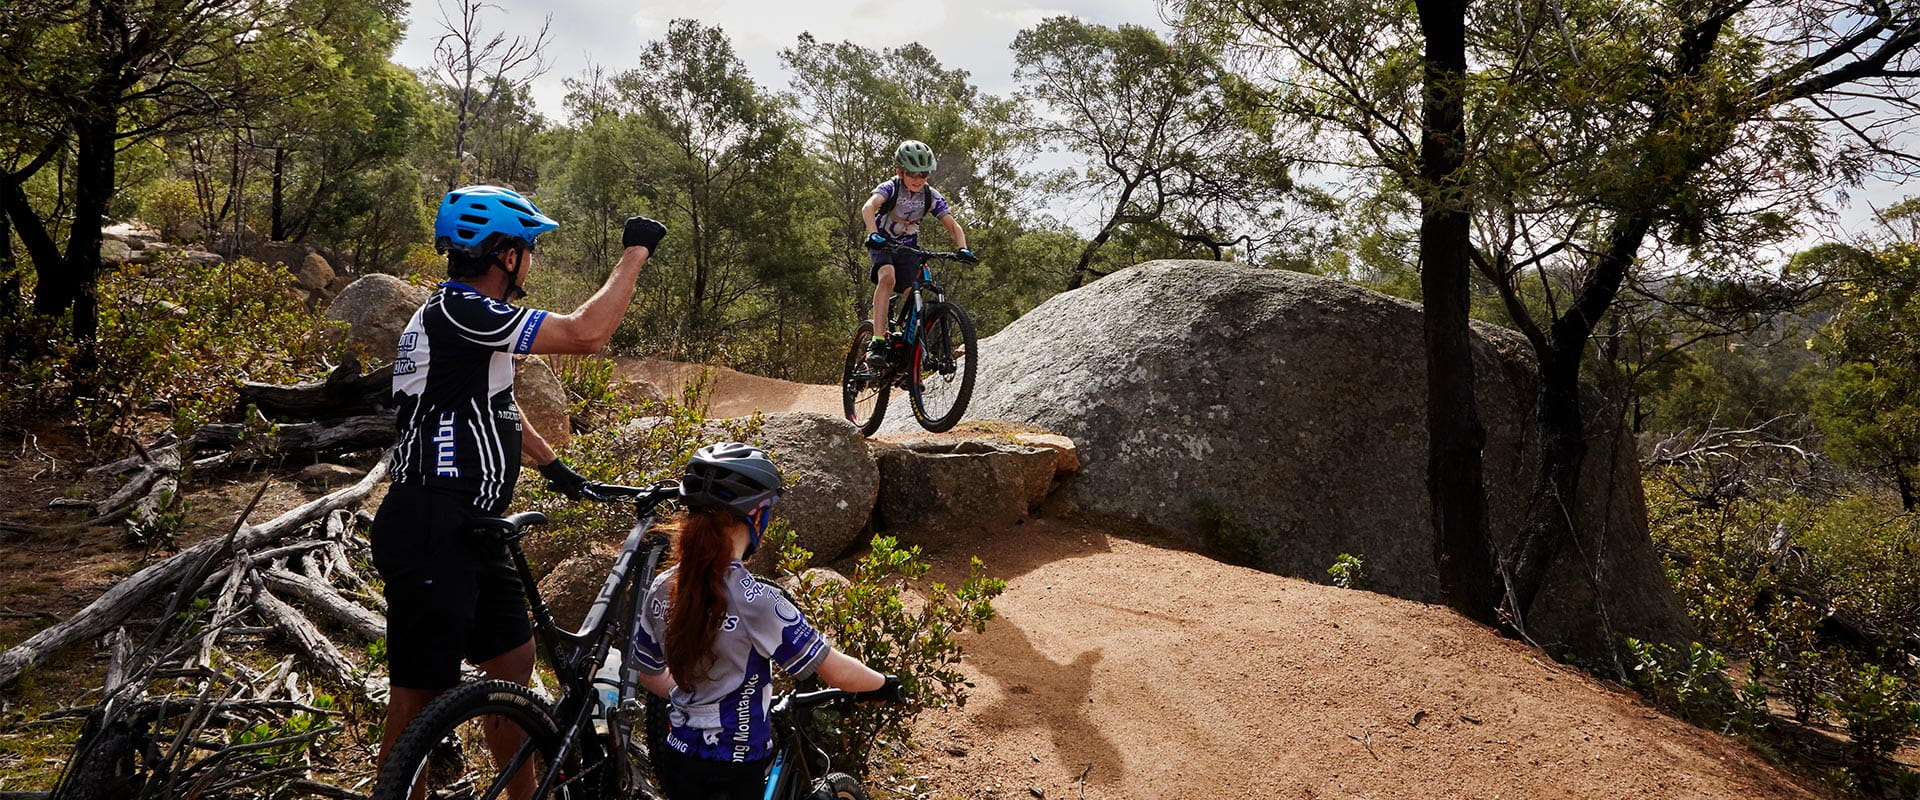 A young mountain biker attempts a drop while cheered on by his father and older sister.